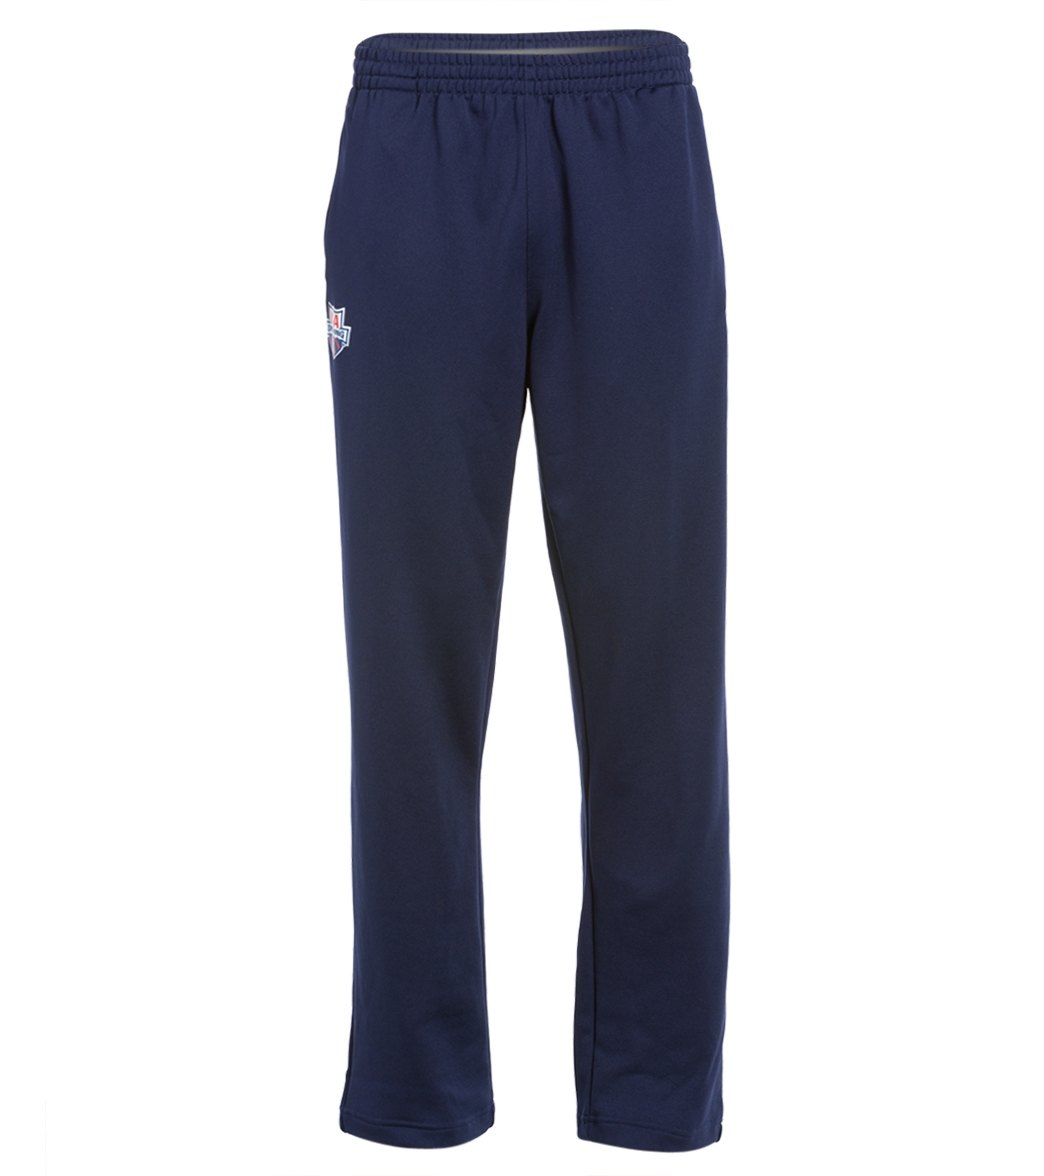 TYR USA Swimming Men's Alliance Victory Warm Up Pant at SwimOutlet.com